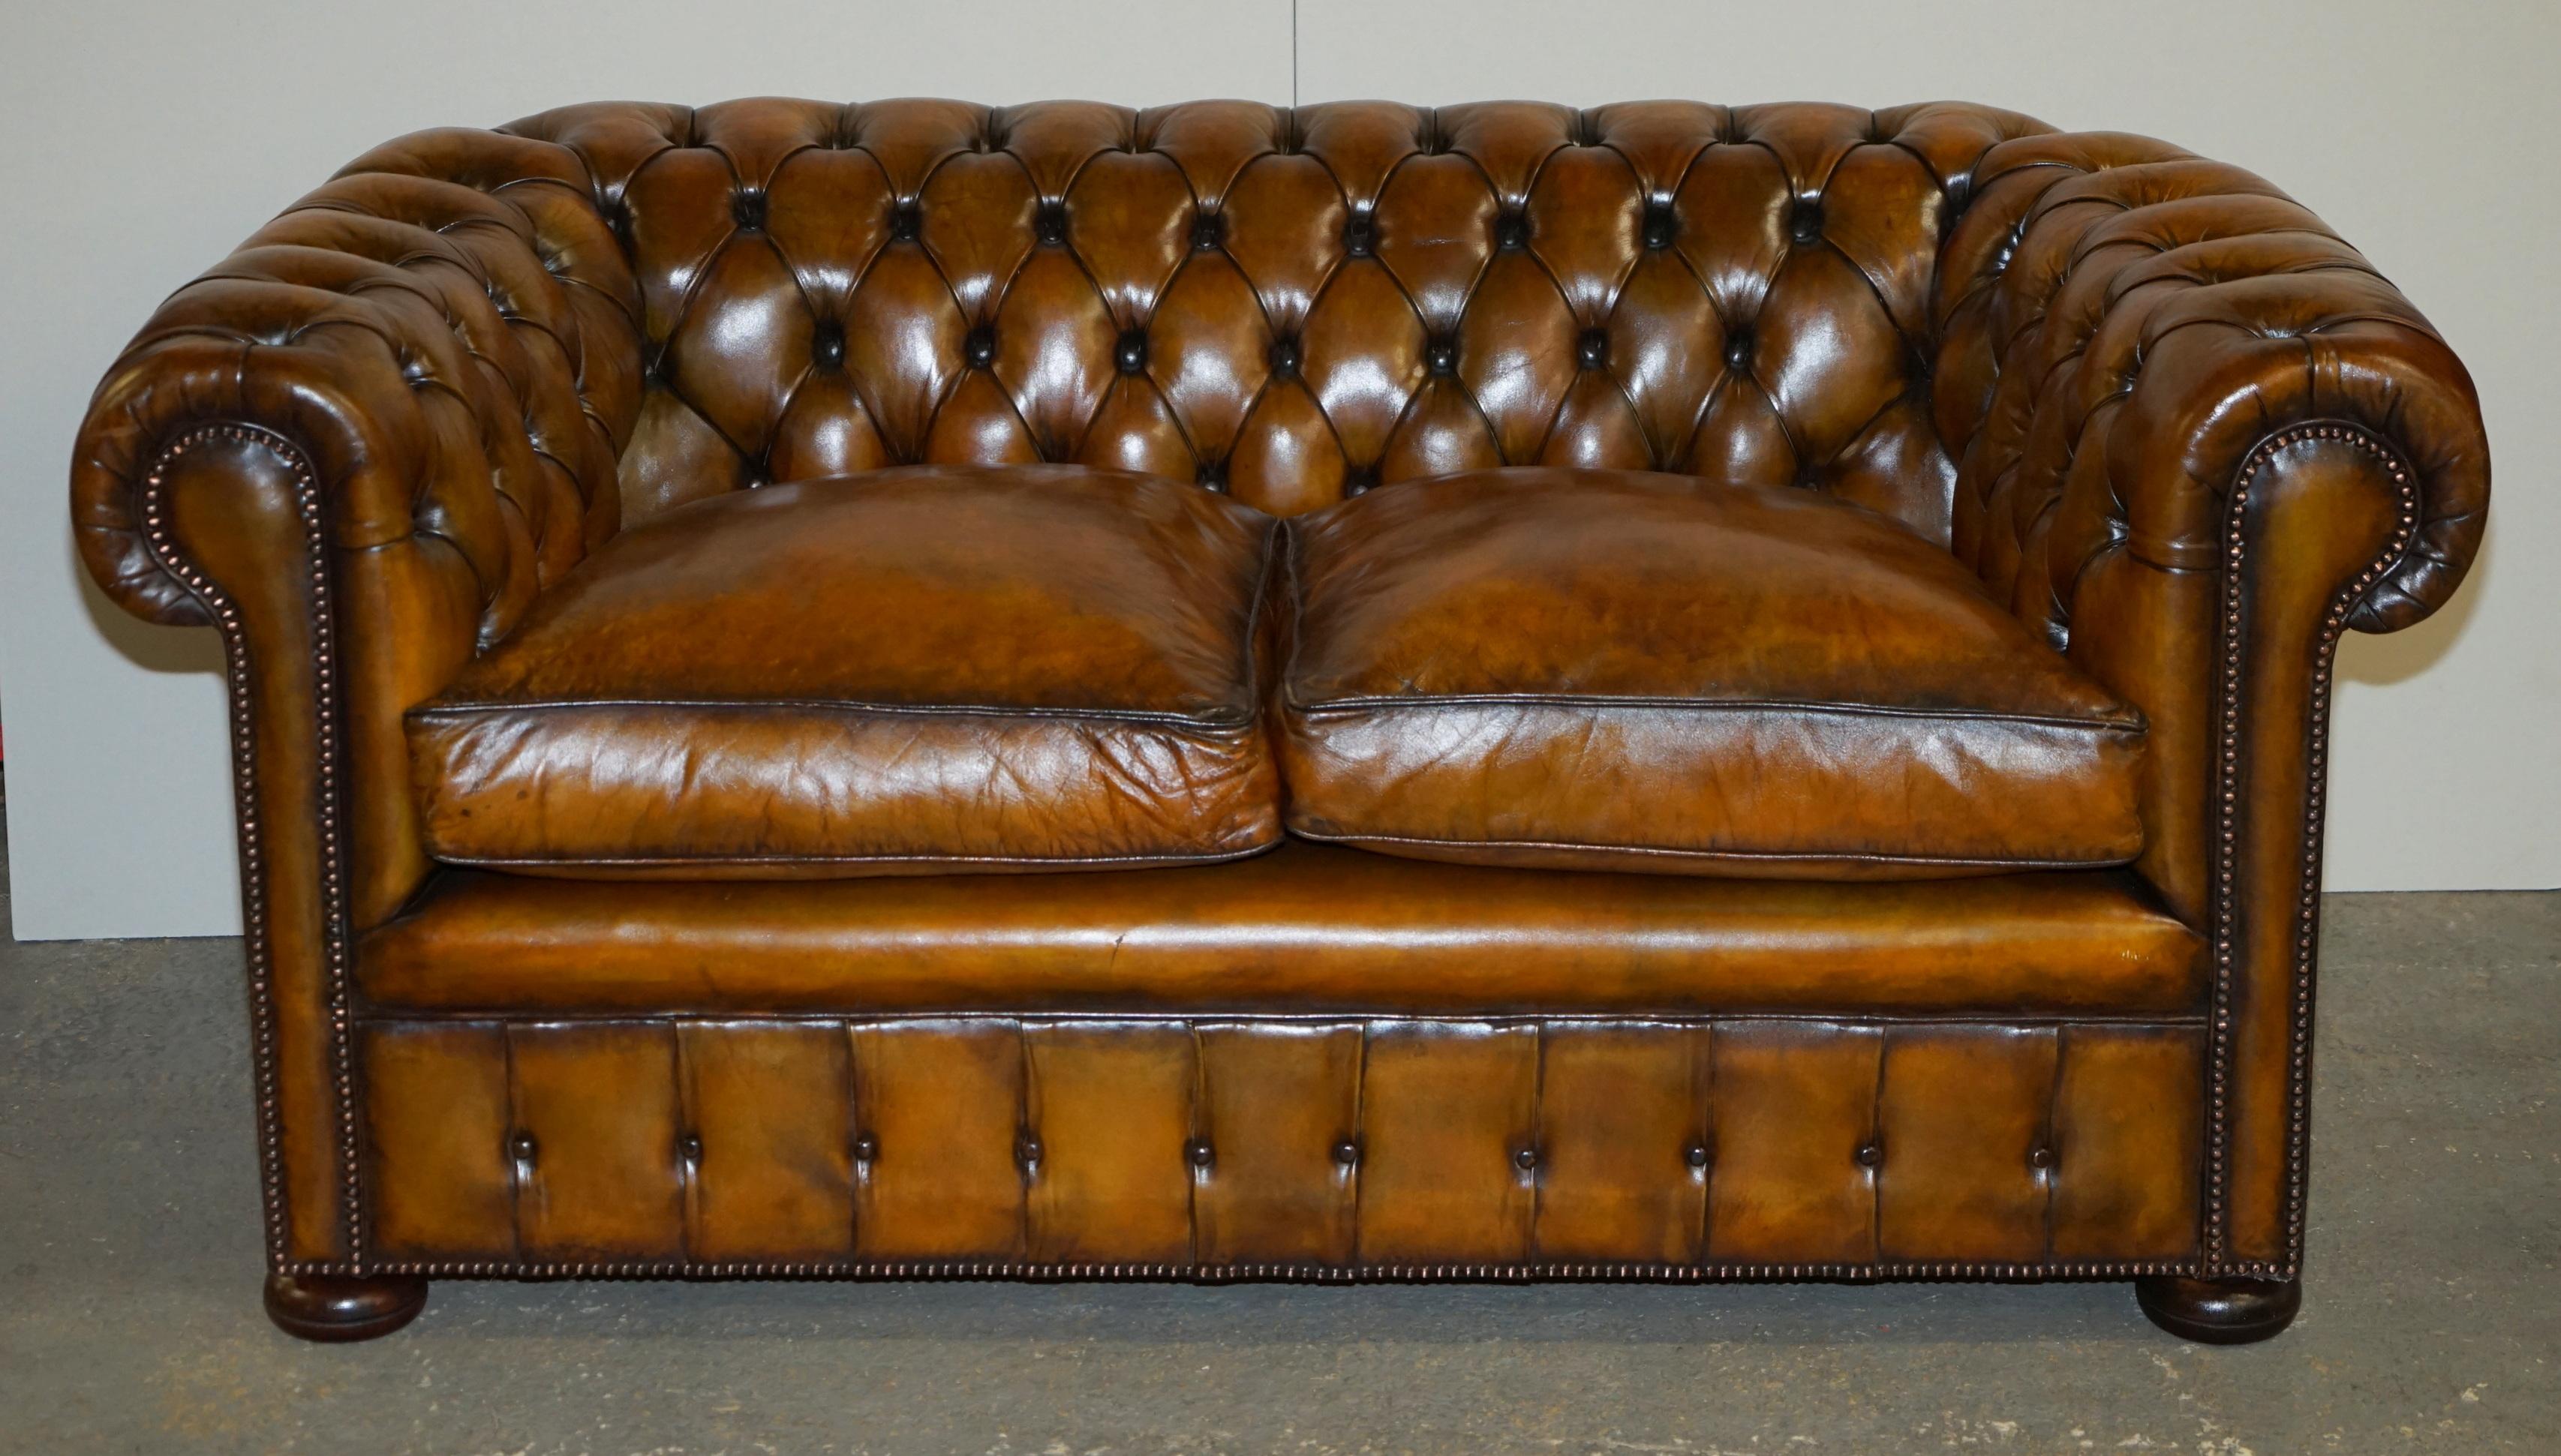 Royal House Antiques

Royal House Antiques is delighted to offer for sale this exceptionally rare original 1940’s Whisky brown leather Chesterfield club sofa in newly restored condition with feather filled cushions.

Please note the delivery fee